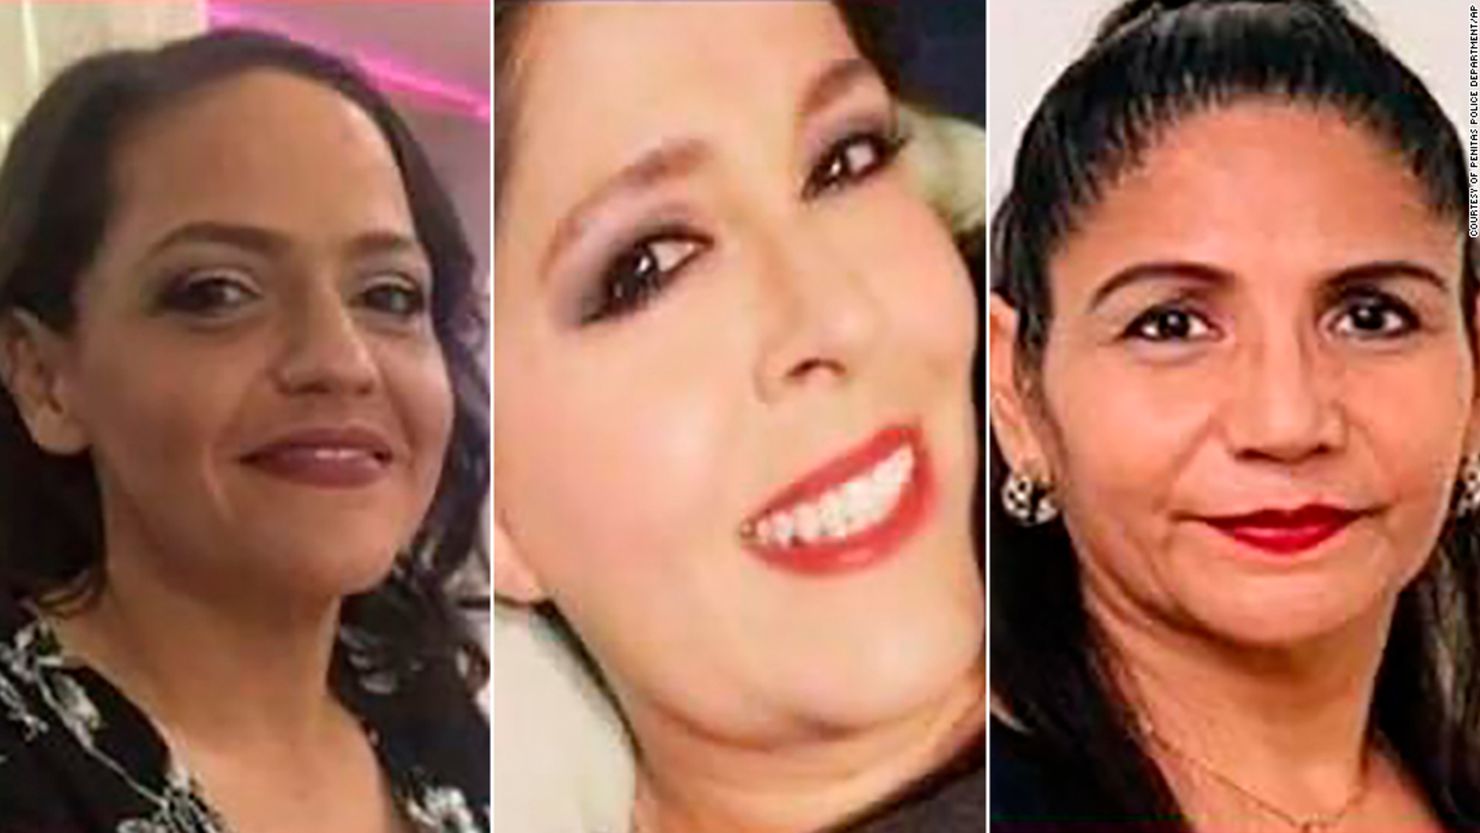 In these undated photos provided by the Penitas Police Department, from left are sisters Martiza Trinidad Perez Rios, 47; Marina Perez Rios, 48; and their friend, Dora Alicia Cervantes Saenz, 53.